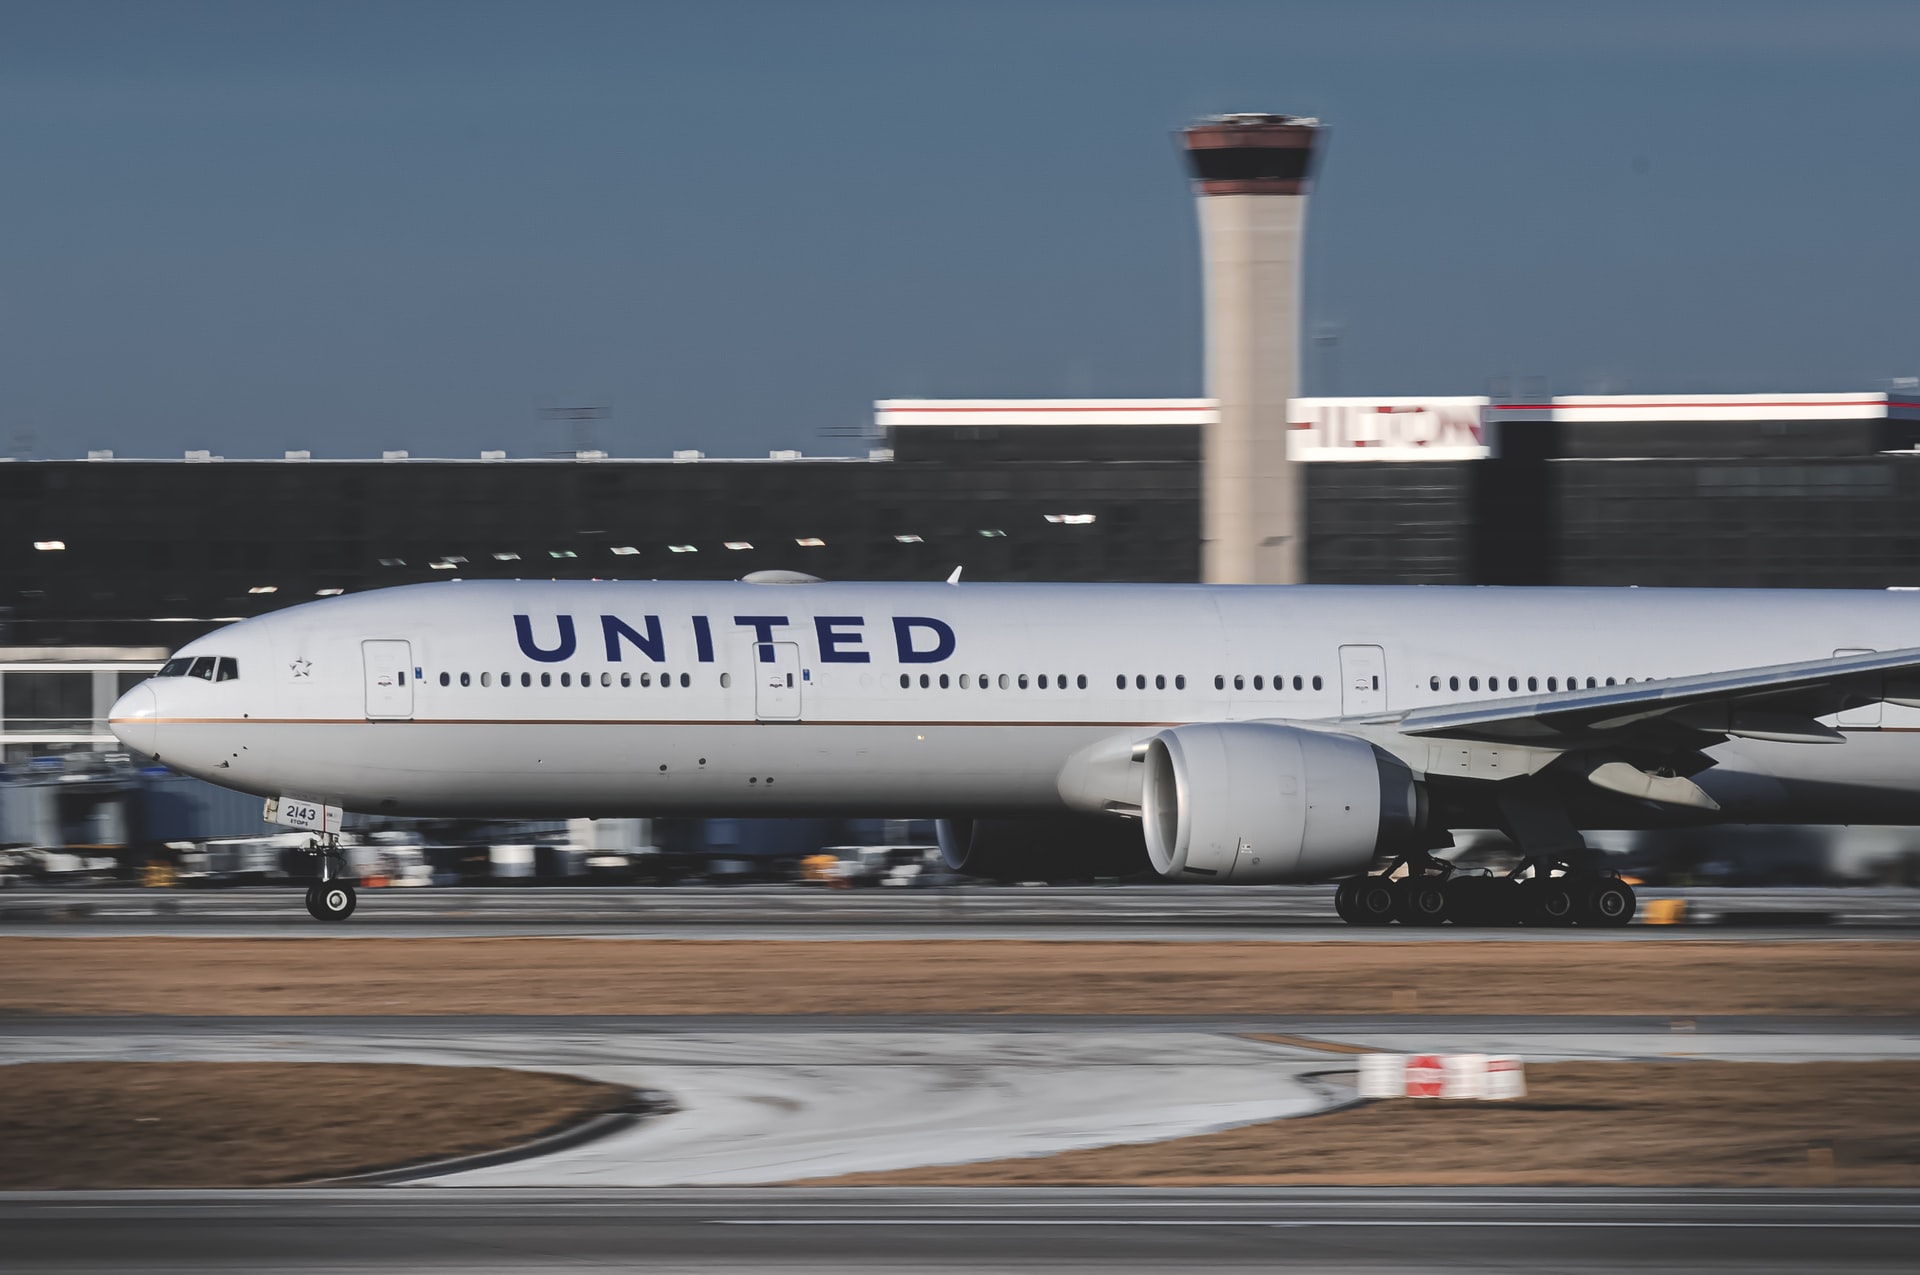 United Airlines aircraft taking off from a runway.